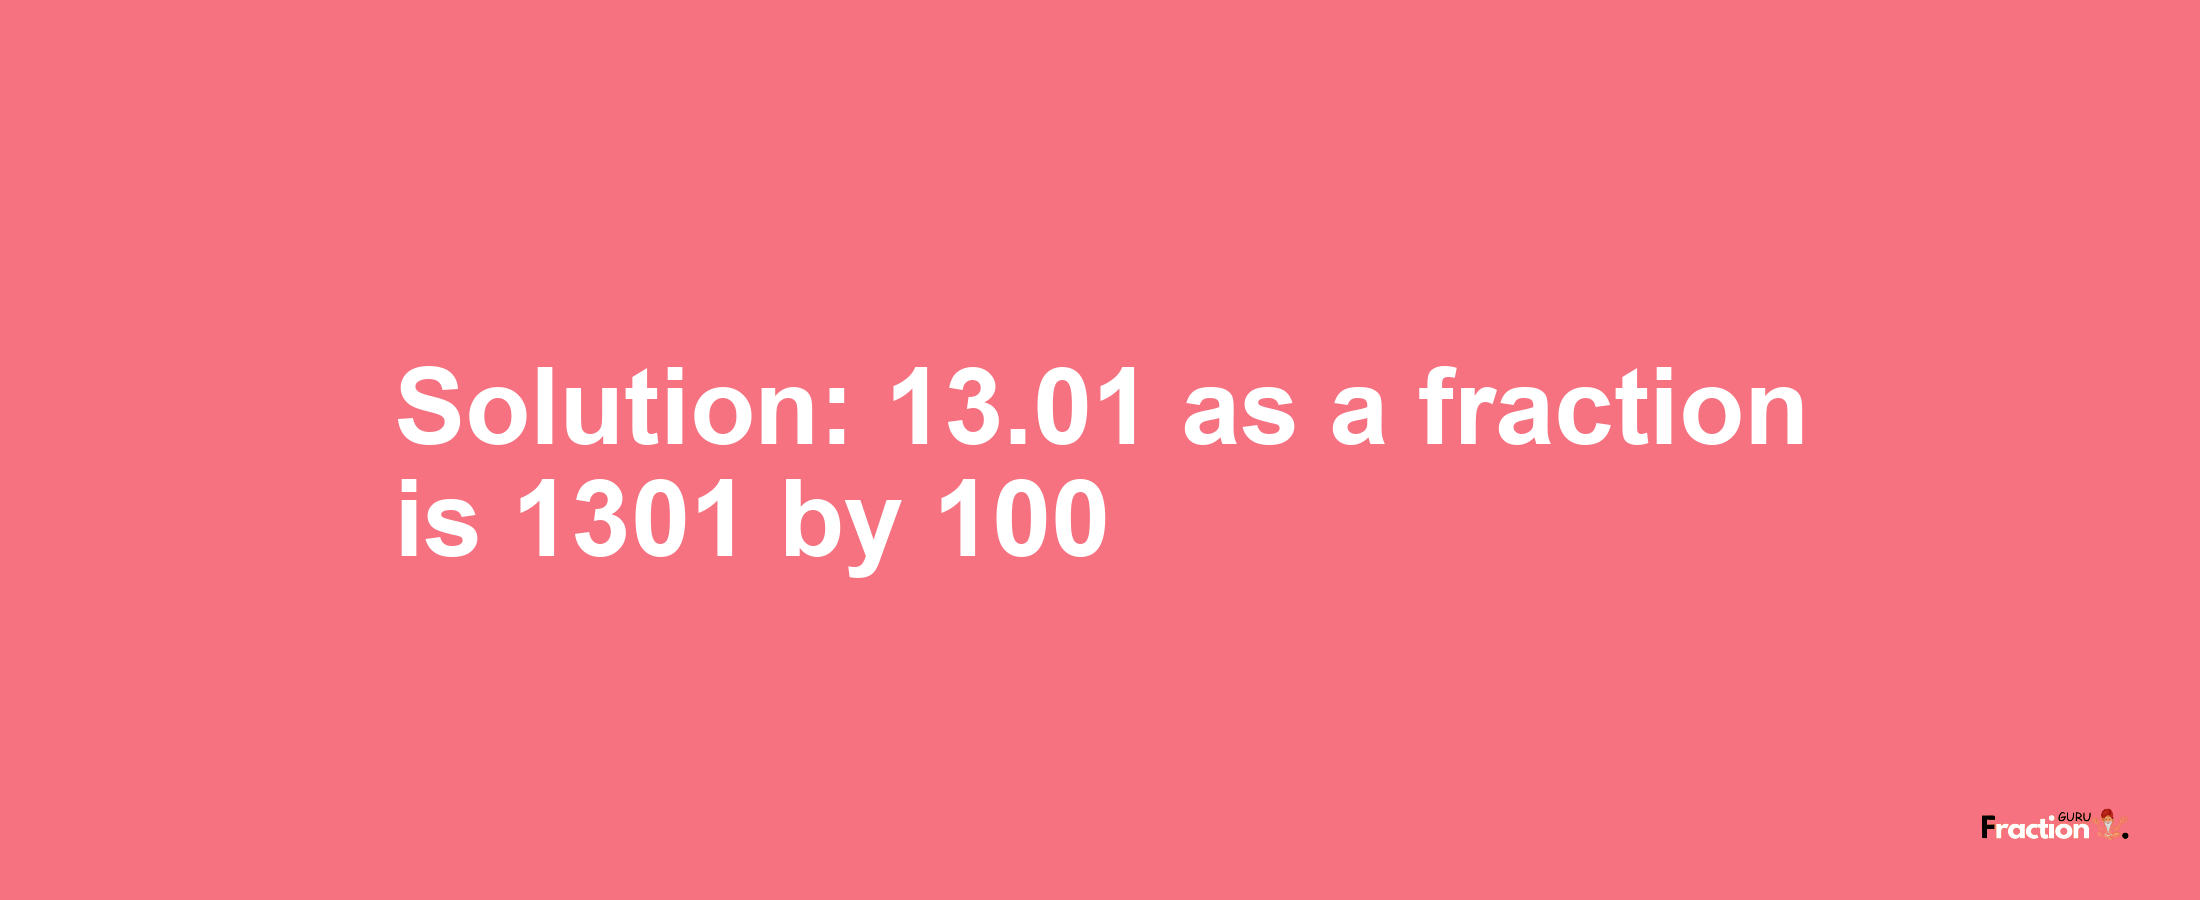 Solution:13.01 as a fraction is 1301/100